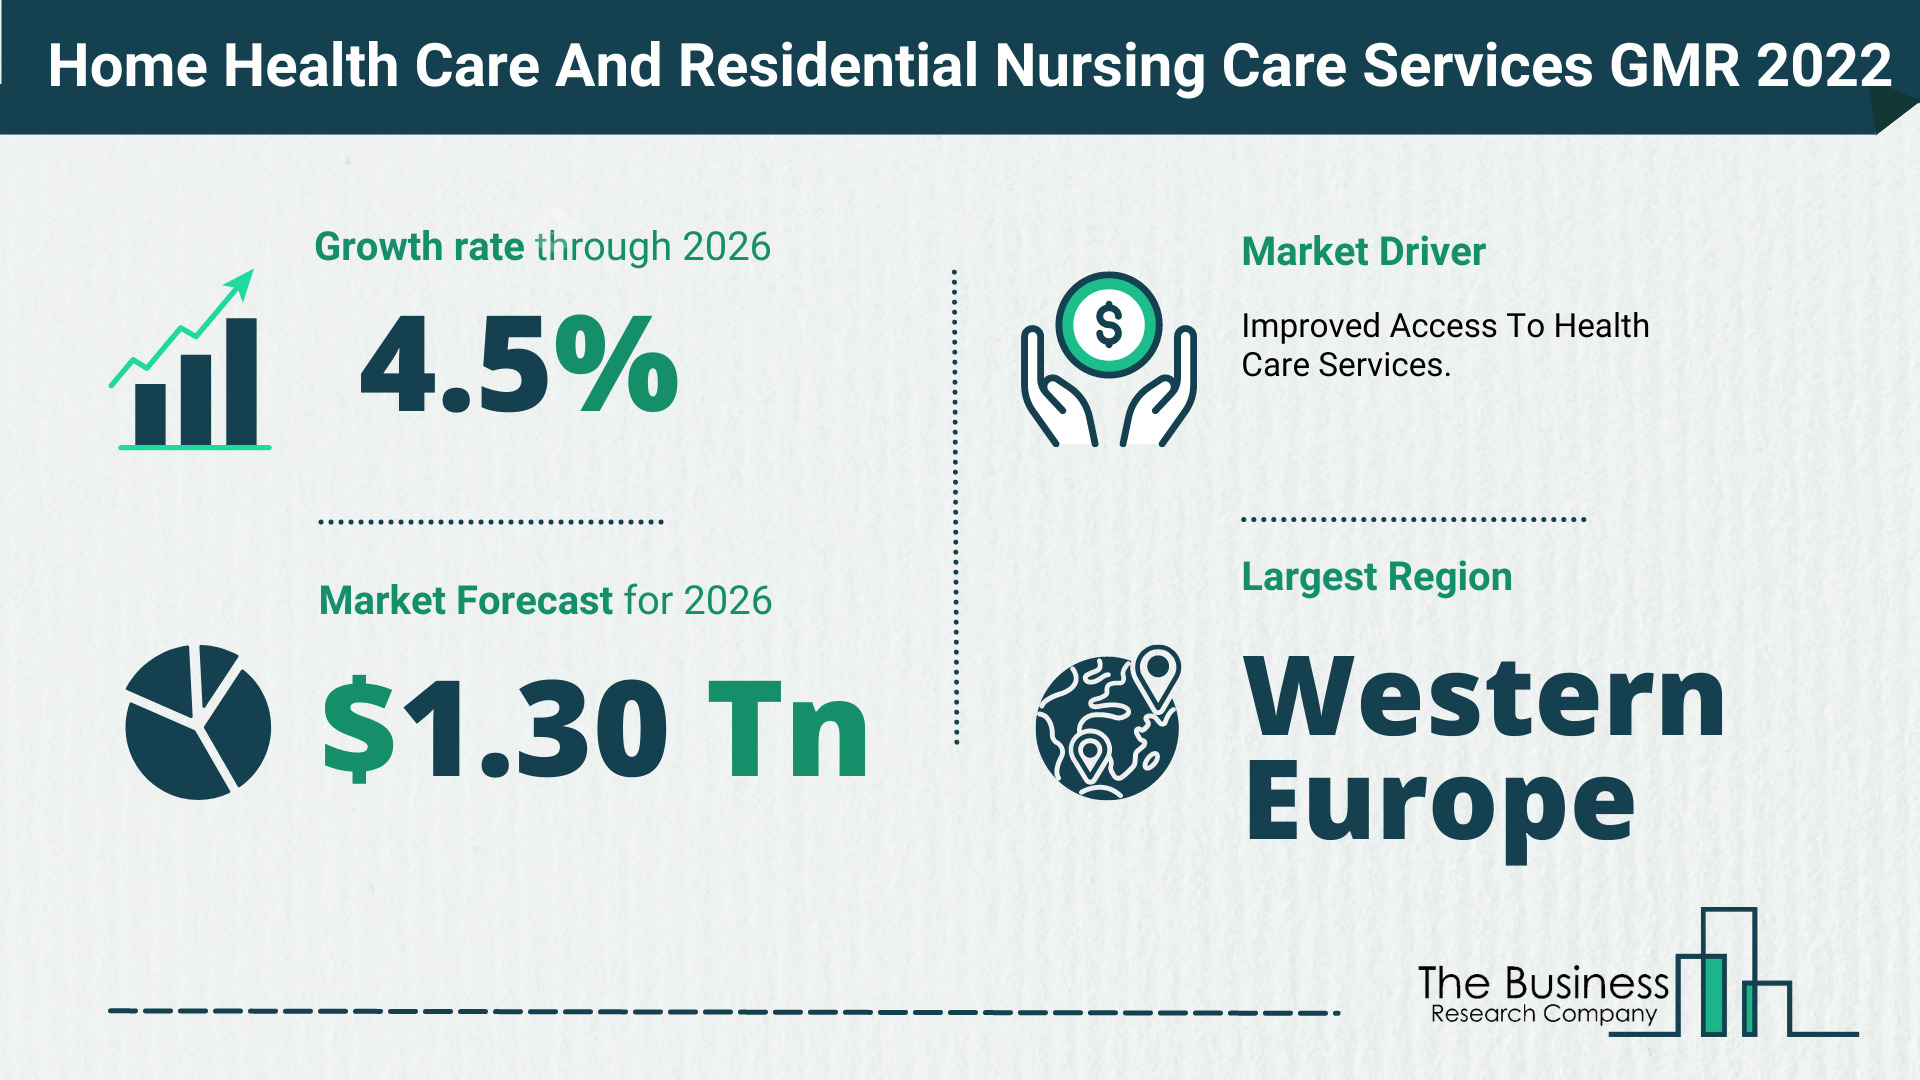 What Is The Home Health Care And Residential Nursing Care Services Market Overview In 2022?